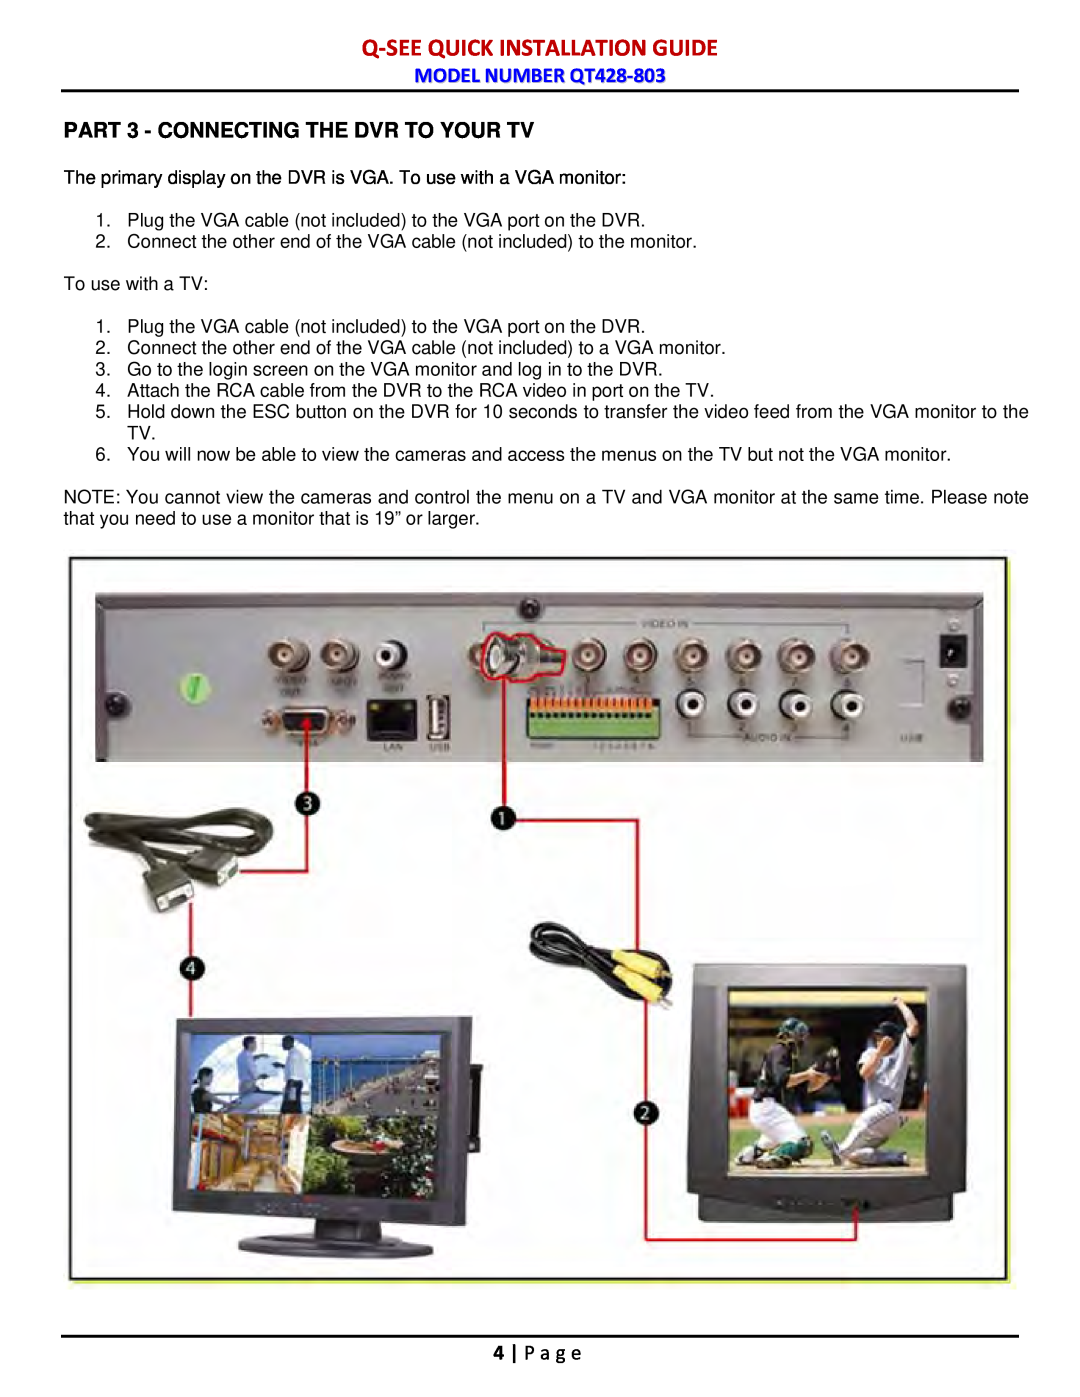 Q-See manual PART 3 - CONNECTING THE DVR TO YOUR TV, P a g e, Q-Seequick Installation Guide, MODEL NUMBER QT428-803 